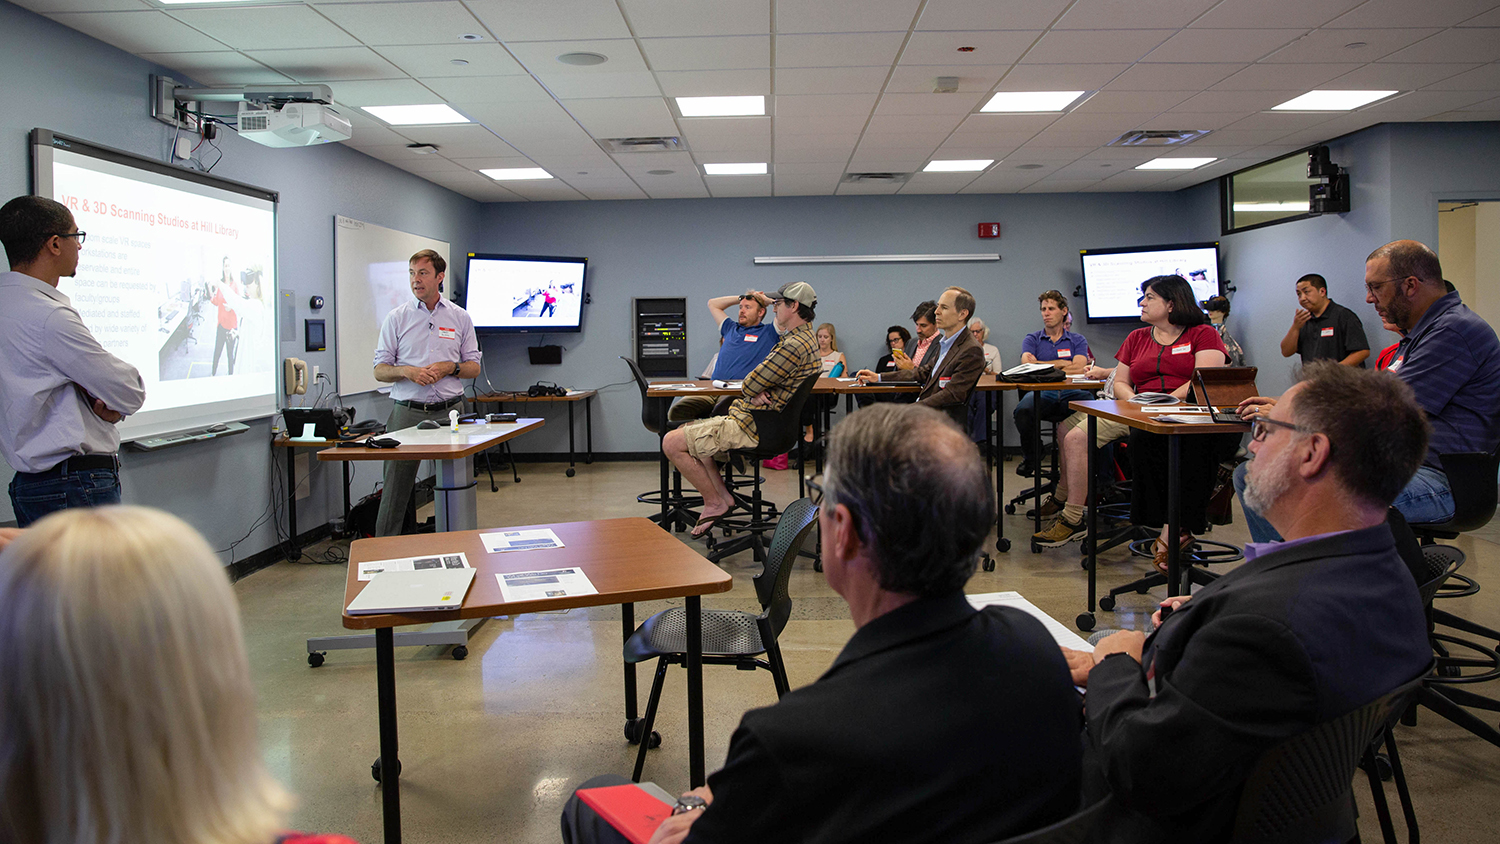 Mike Cuales (front left) and David Woodbury (front right) give a presentation at San Diego State University about immersive learning technologies and spaces. Cuales and Woodbury are at the front of the room and there are participants sitting at tables engaged in their presentation.